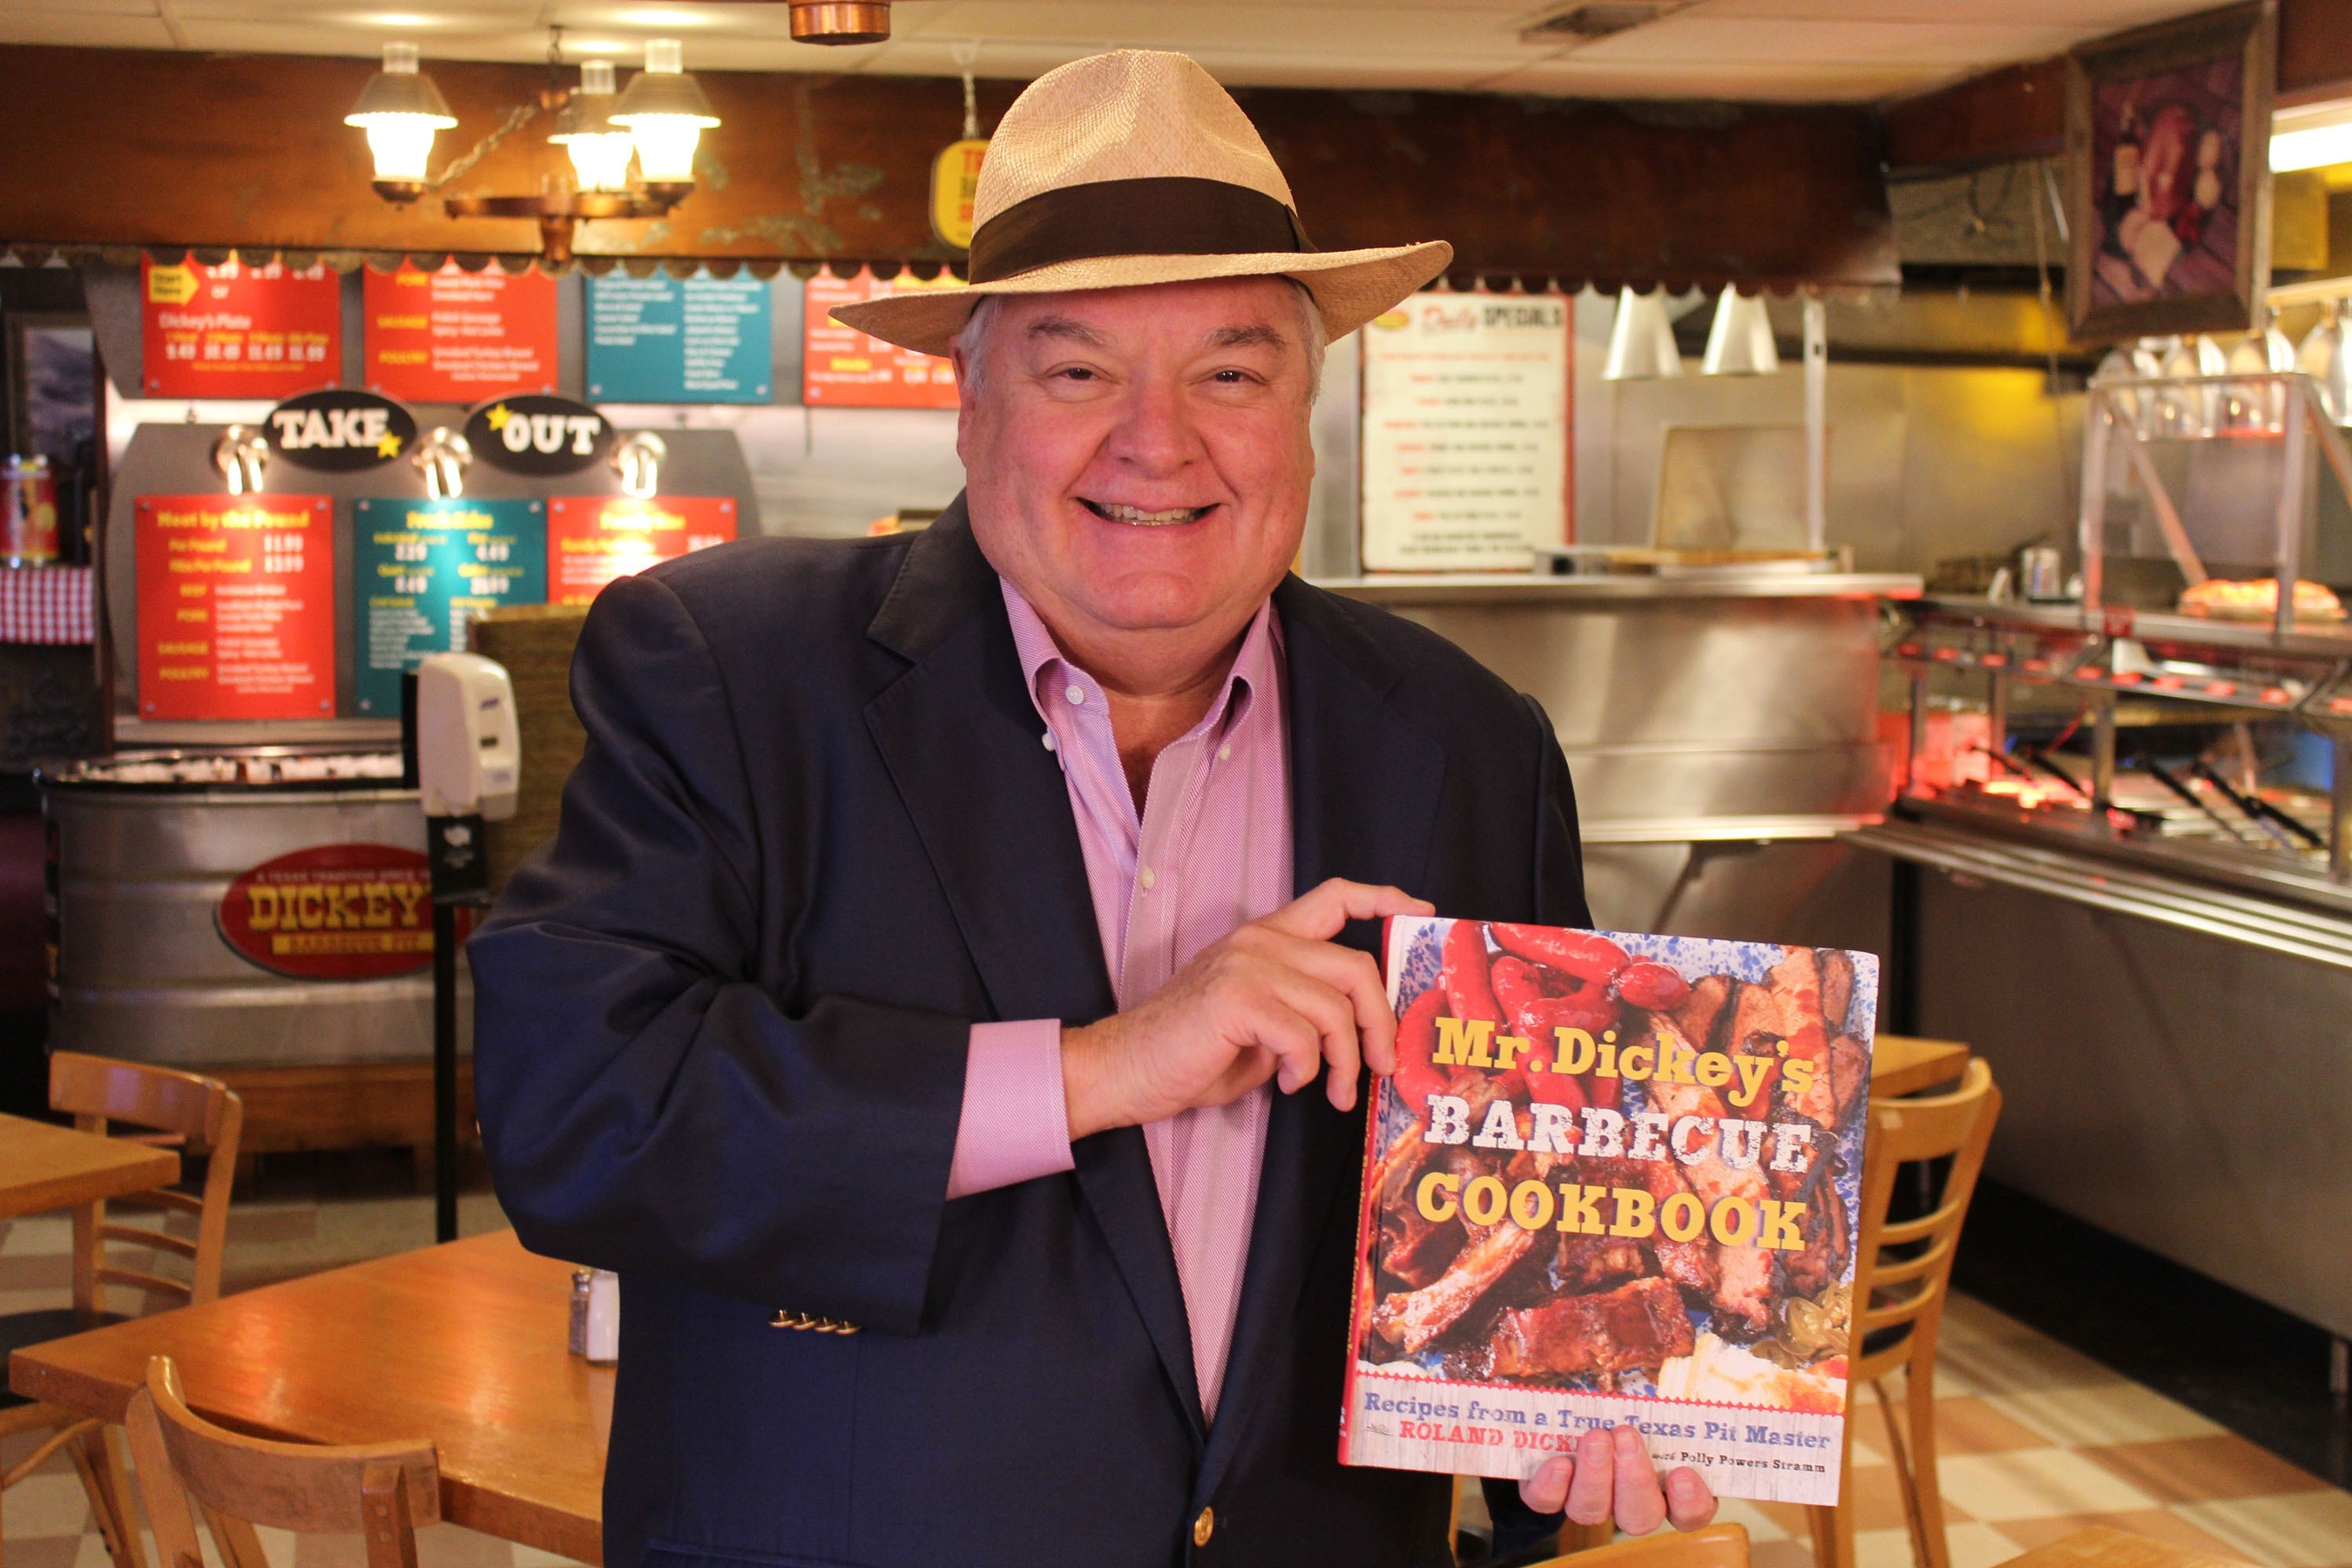 Mr. Dickey joins the grand opening celebration of Dickey's Barbecue in Laguna Niguel on Friday to hand out 100 copies of his cookbook and meet with guests.